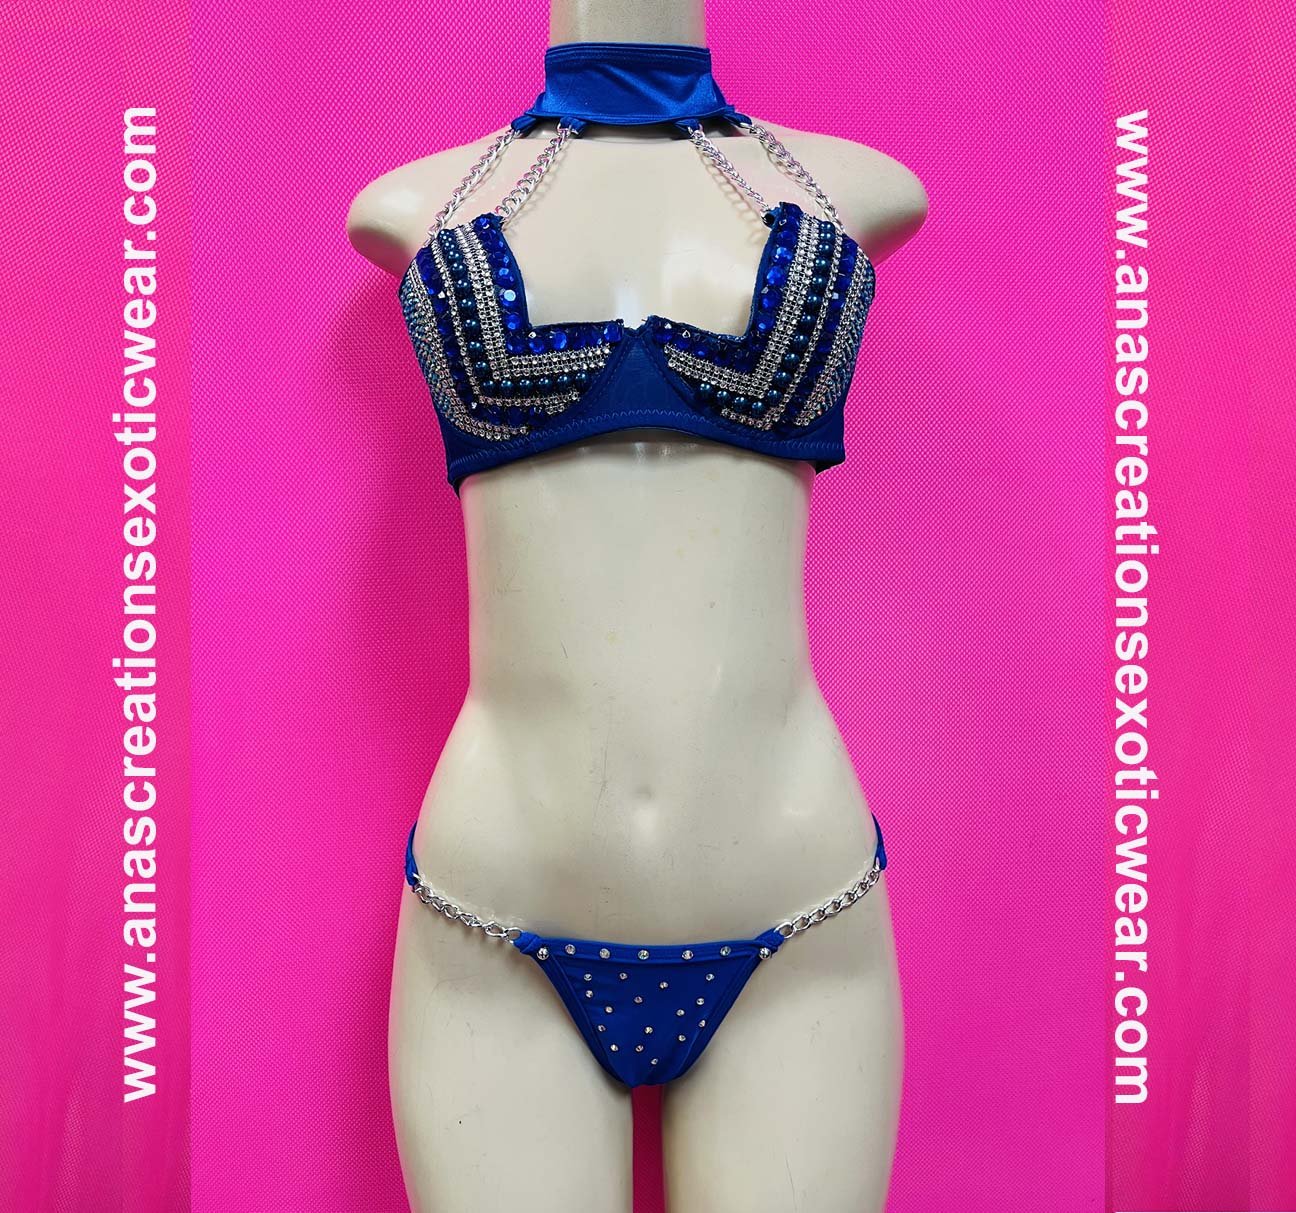 Ana's Creations Exotic Wear  Sensual Lingerie and Clothing